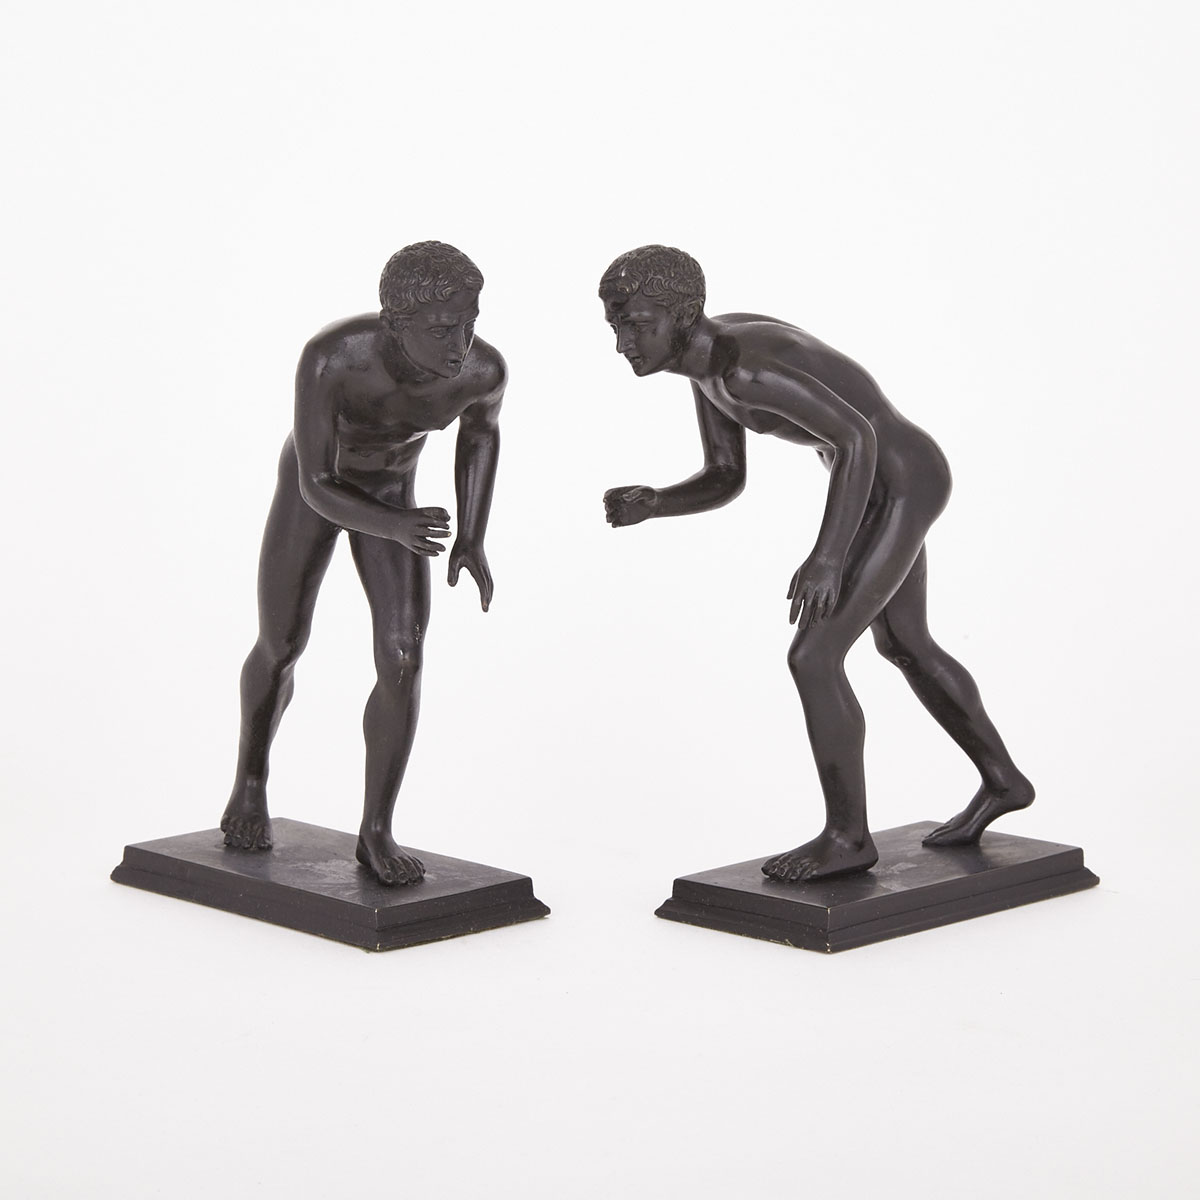 Pair of ‘Grand Tour Souvenir’ Patinated Bronze Figures of Wrestlers, After the Ancient, 19th century